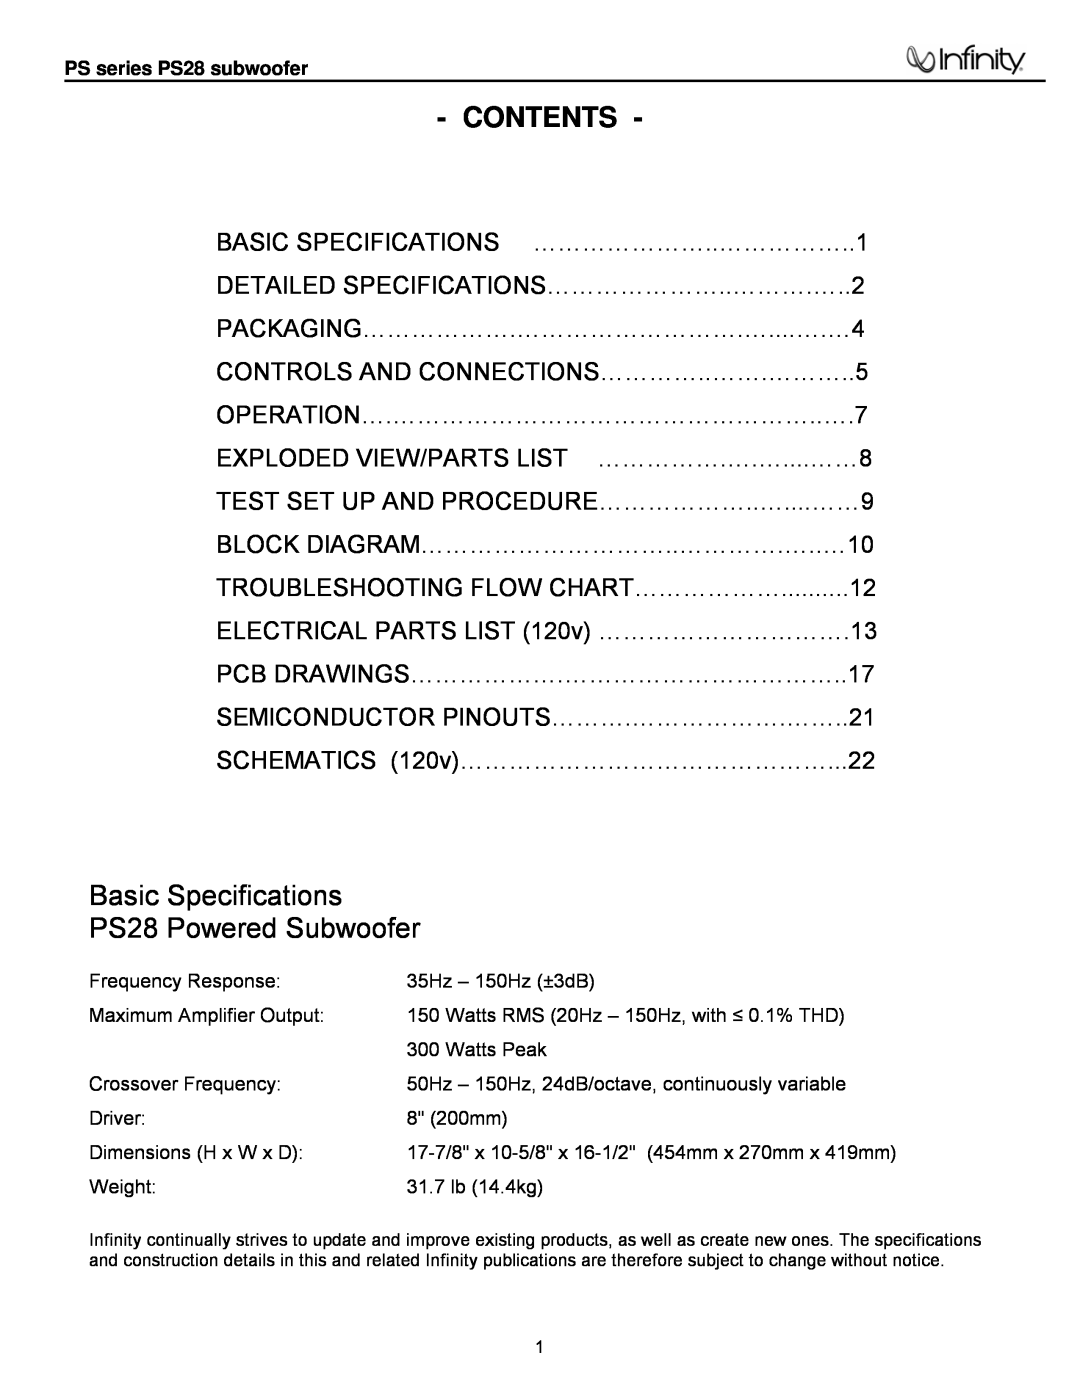 Infinity service manual Contents, Basic Specifications PS28 Powered Subwoofer 